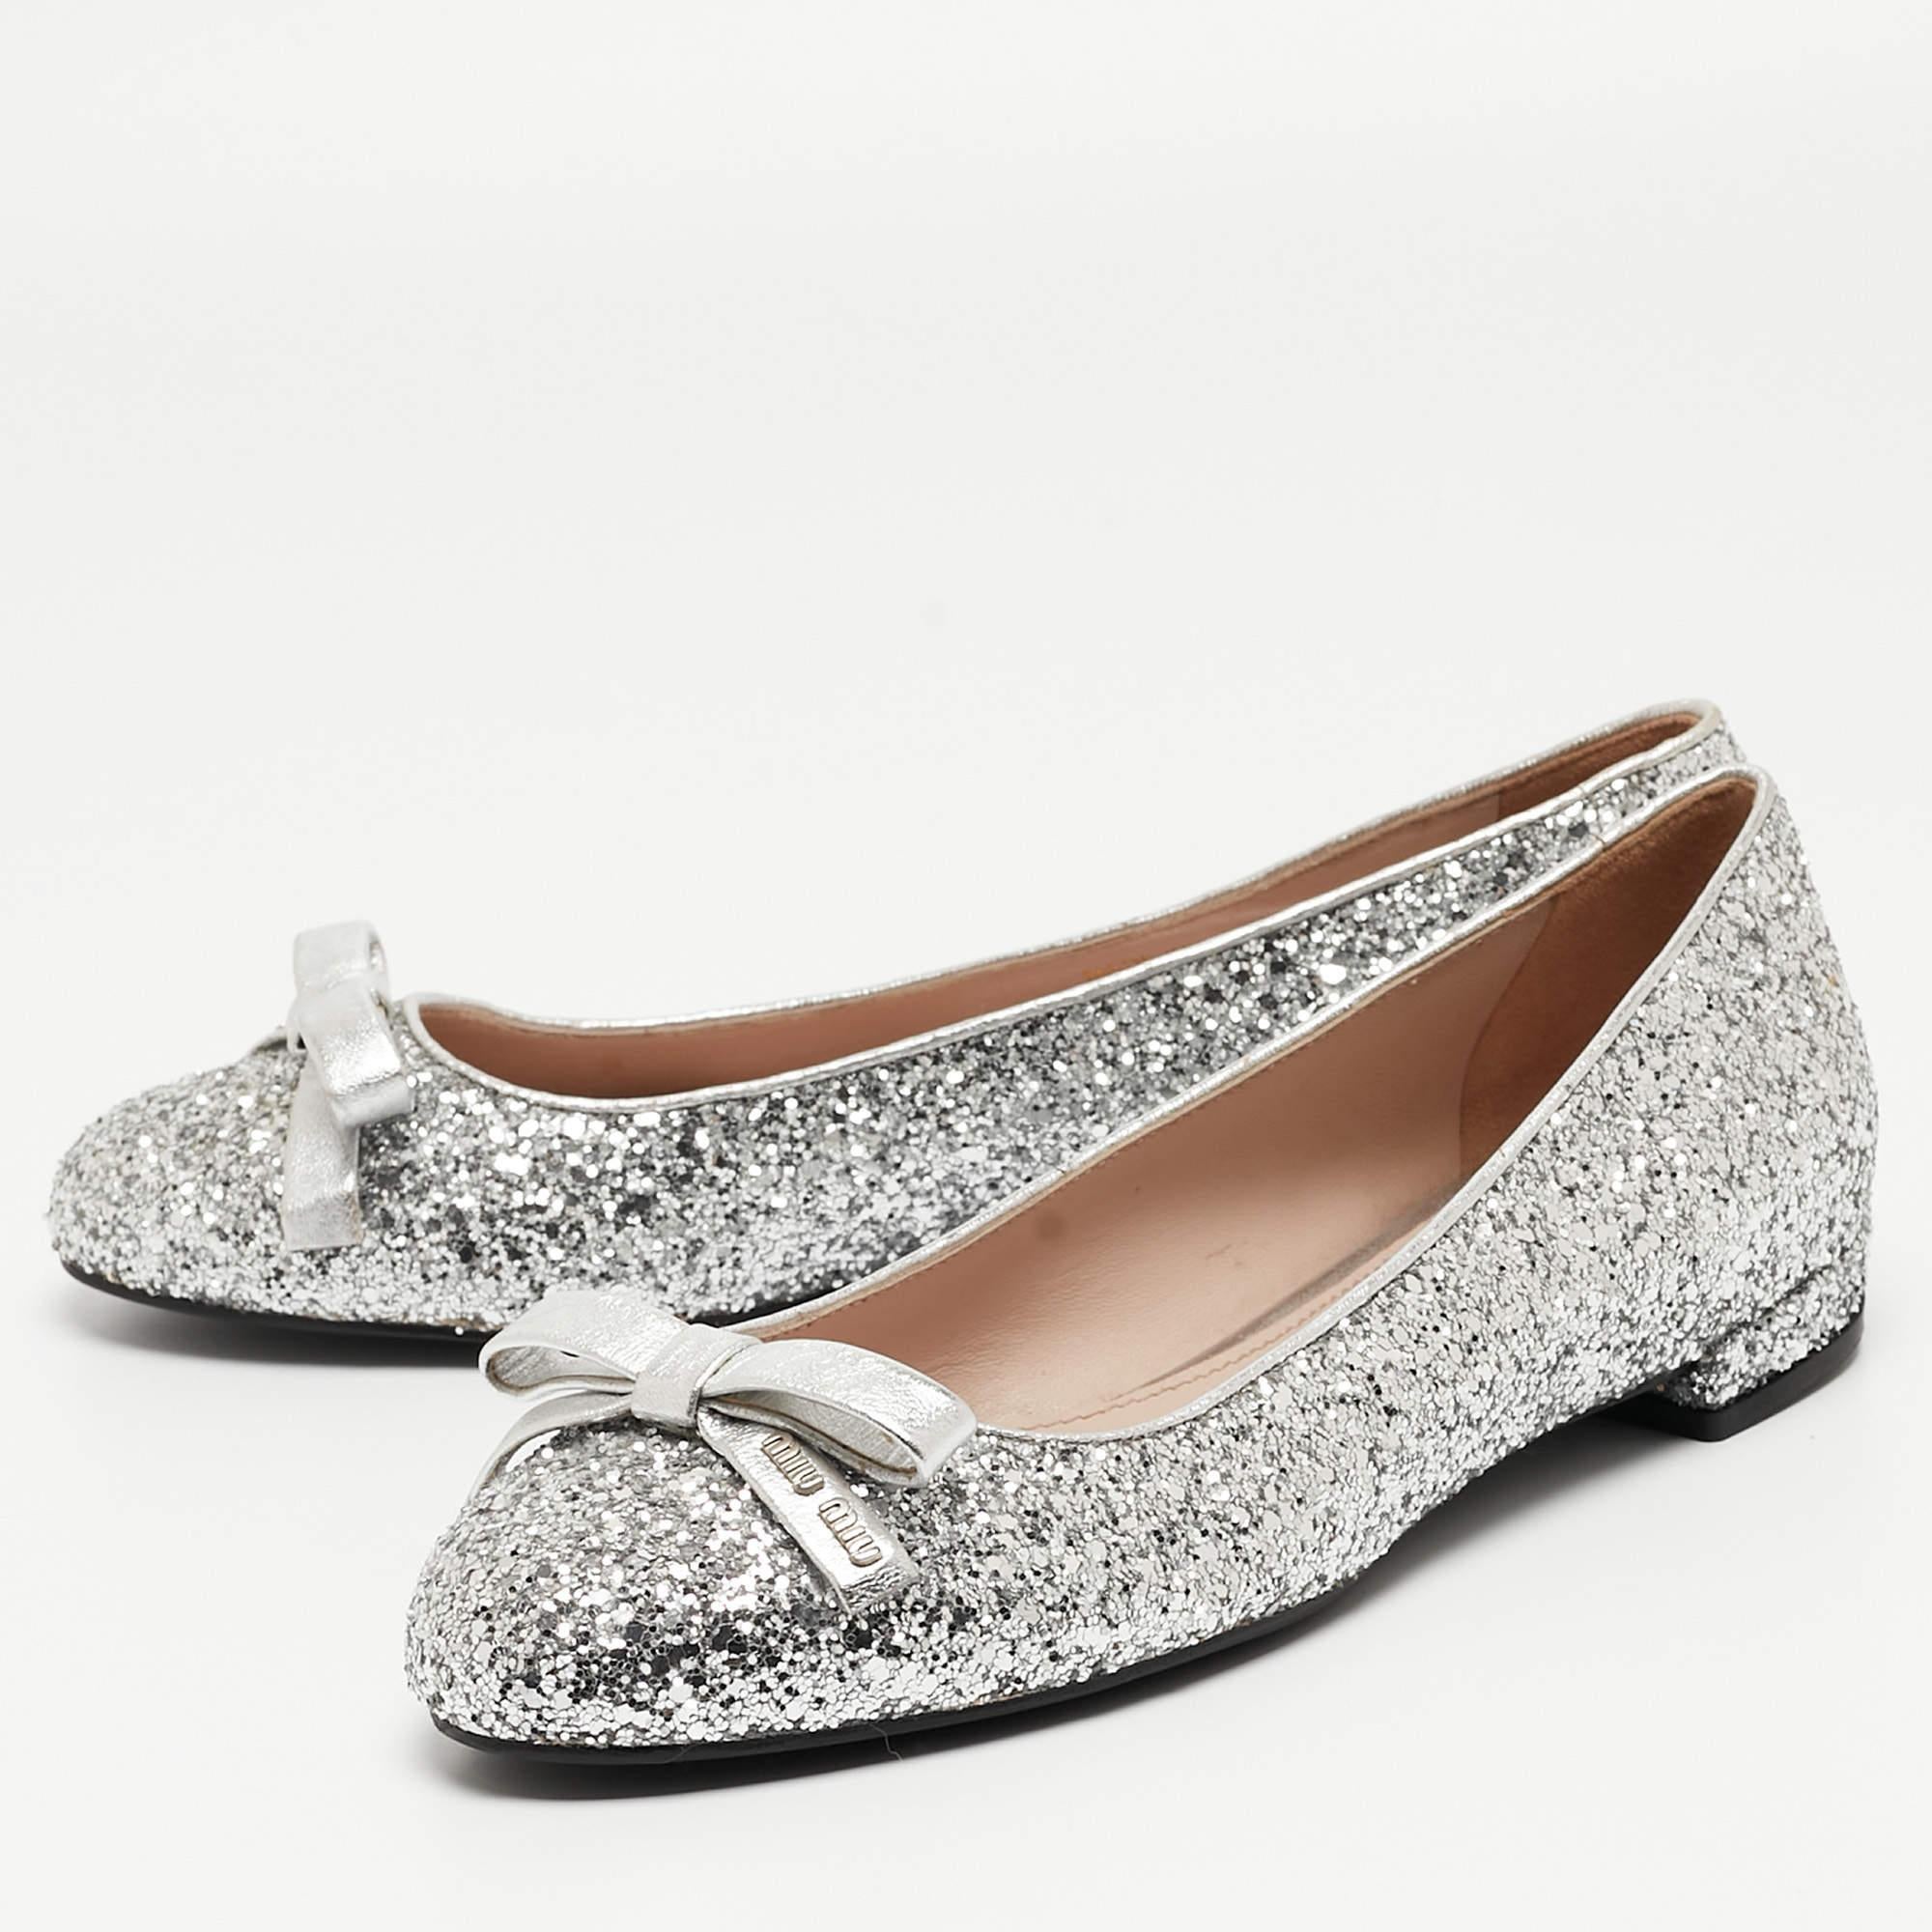 Frame your feet with these Miu Miu flats. Created using coarse glitter, the flats are perfect with short, midi, and maxi hemlines.

